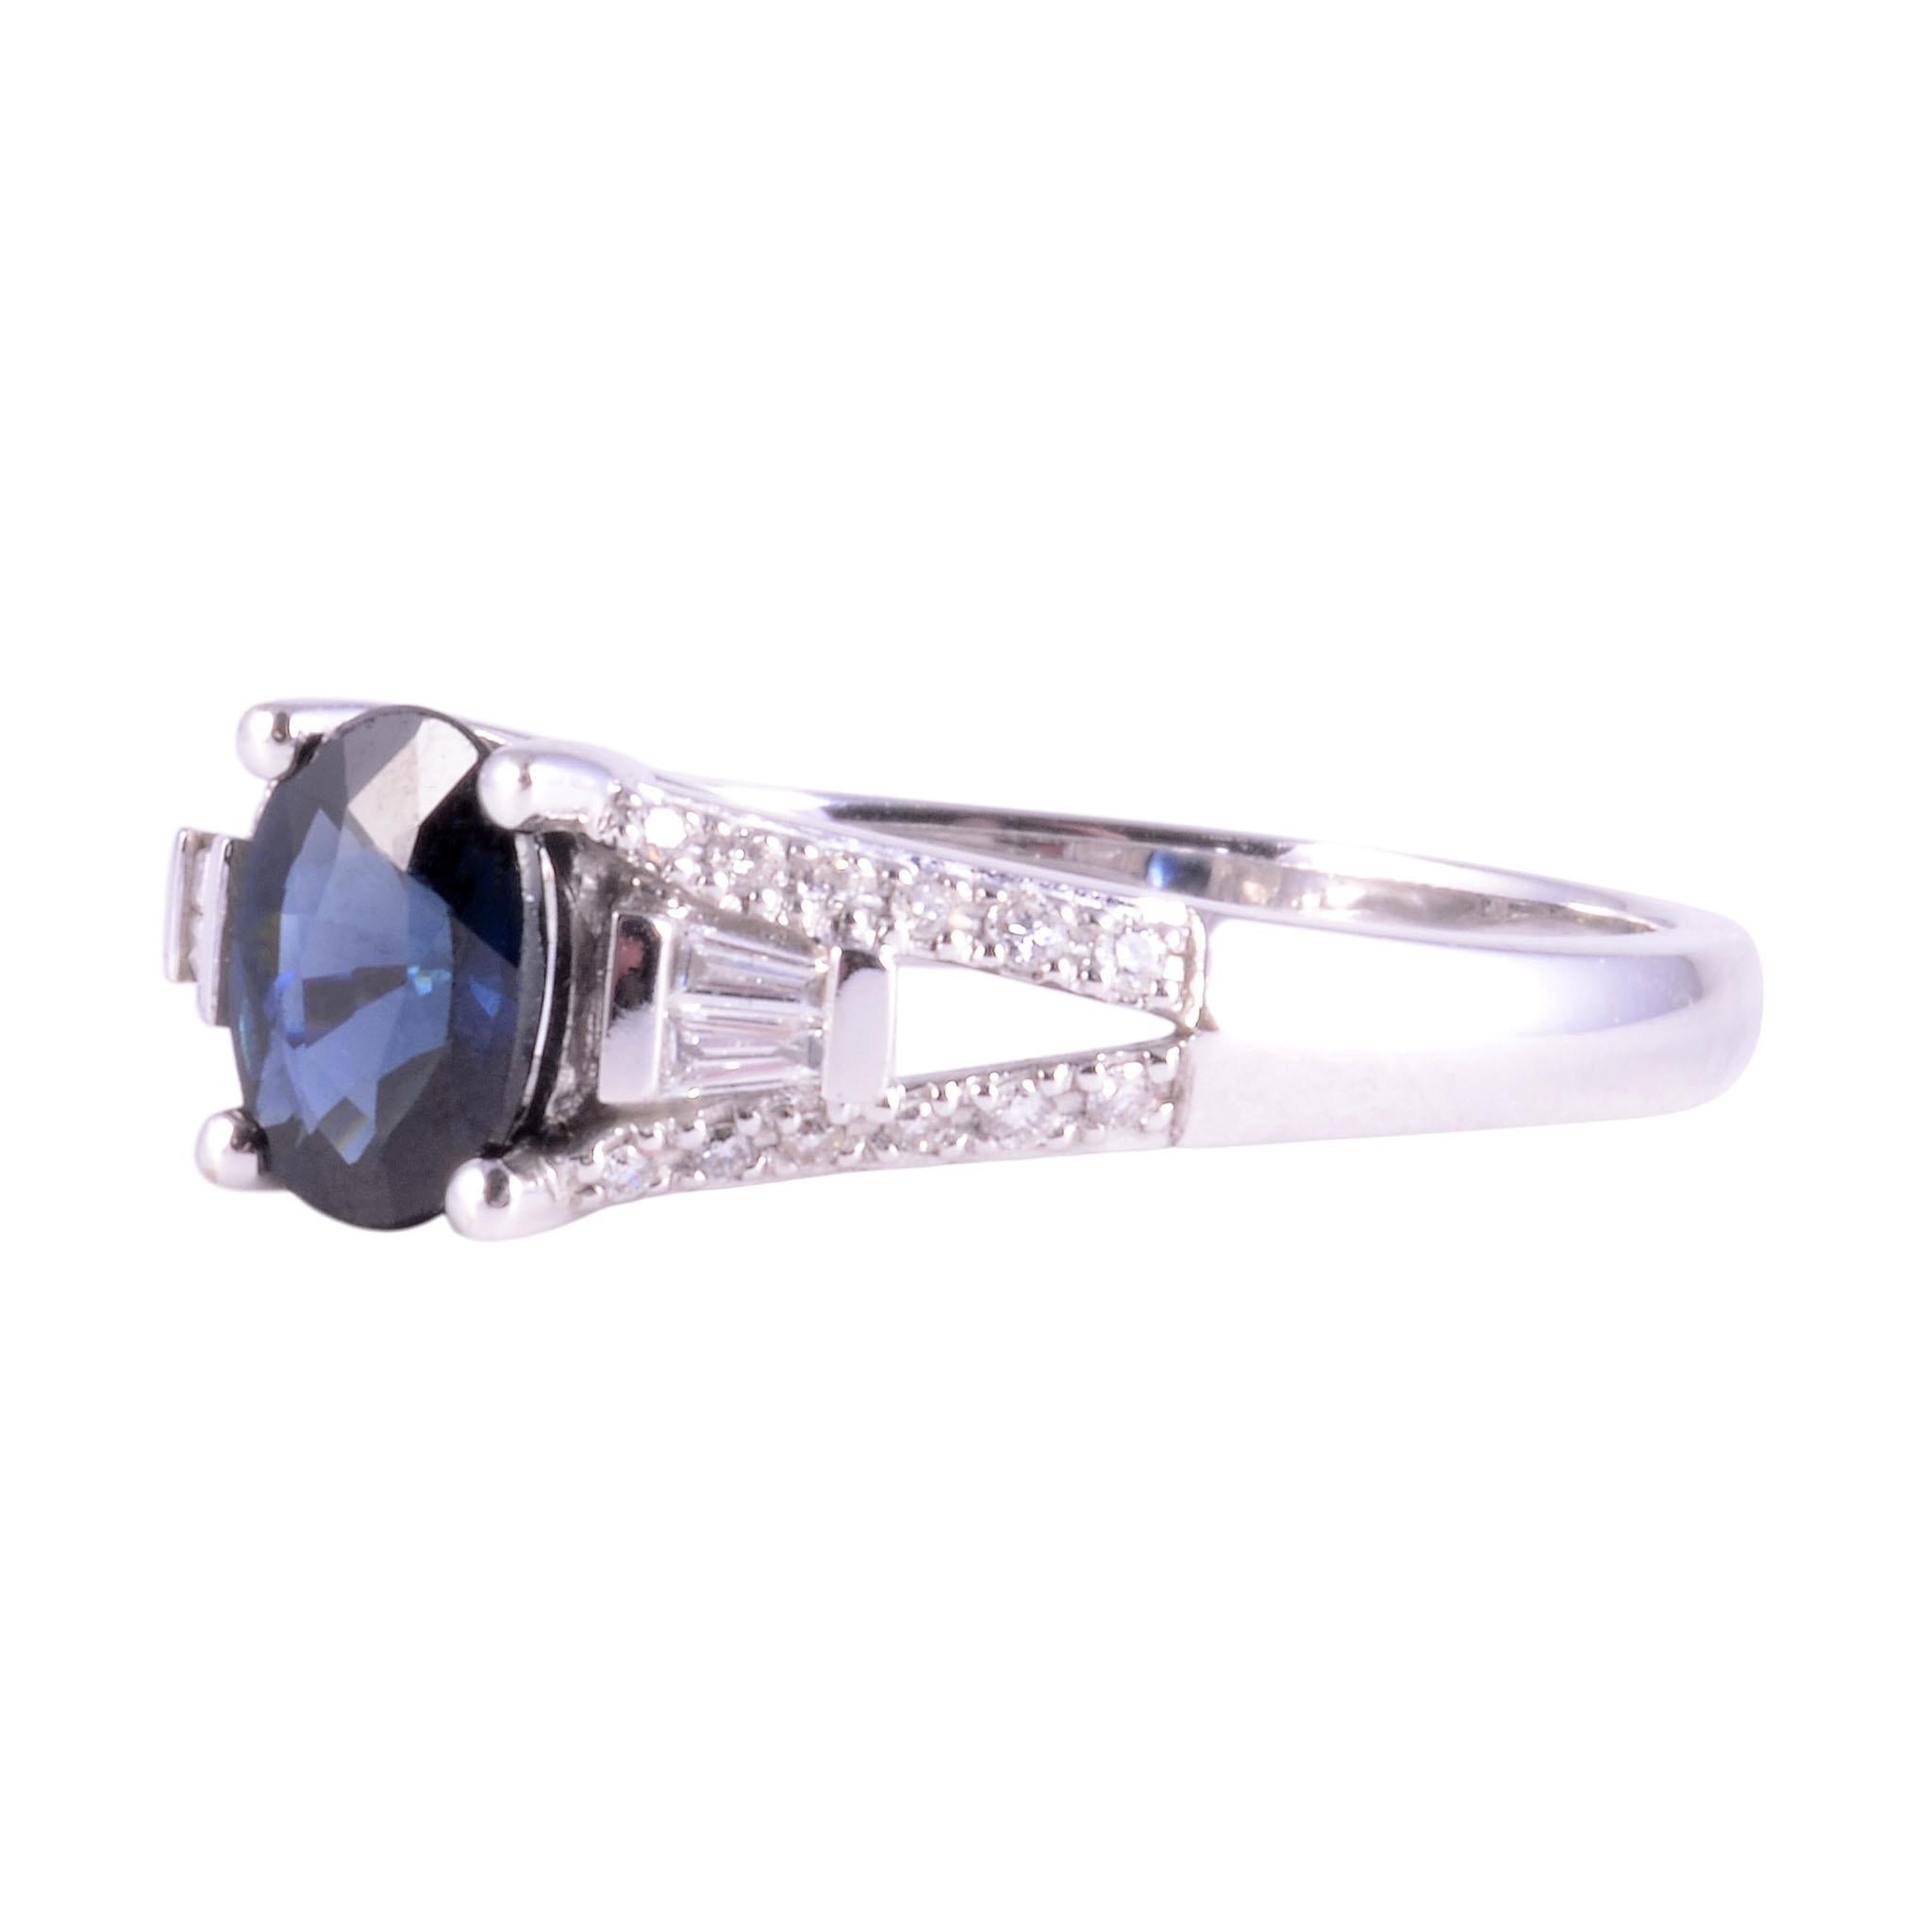 Estate 0.80 sapphire and VS diamond ring. This 14 karat white gold oval sapphire ring has .25 carat total weight diamonds with 24 round and baguette diamonds VS-SI clarity and G-H color. The sapphire measures approximately 7mm x 5mm and is a fine